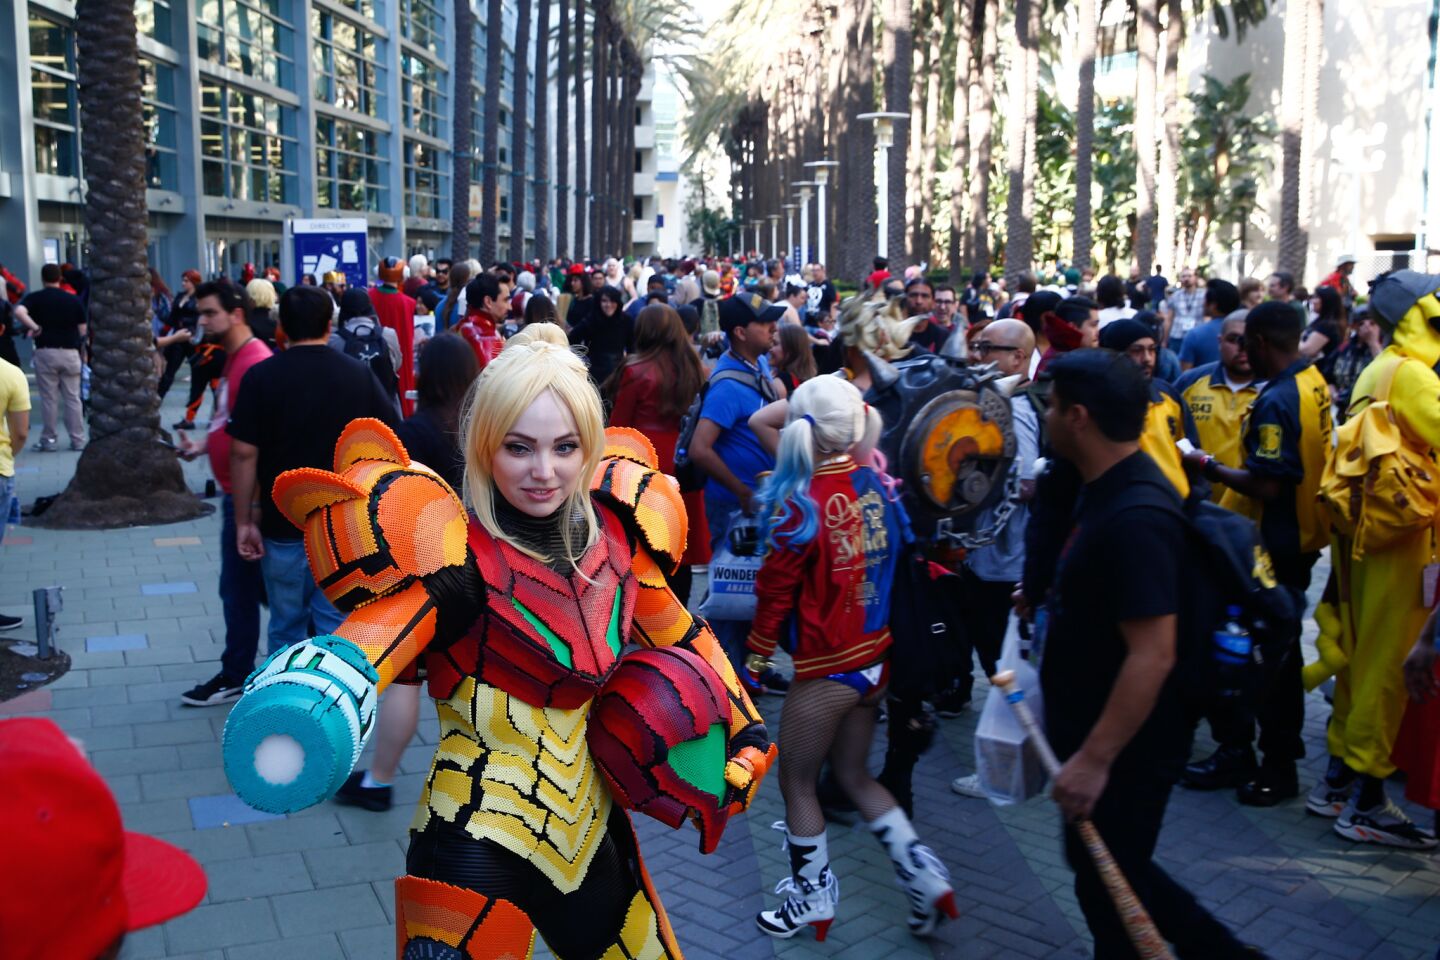 Amy Spence poses while dressed as Samus Aran from the video game series “Metroid.”